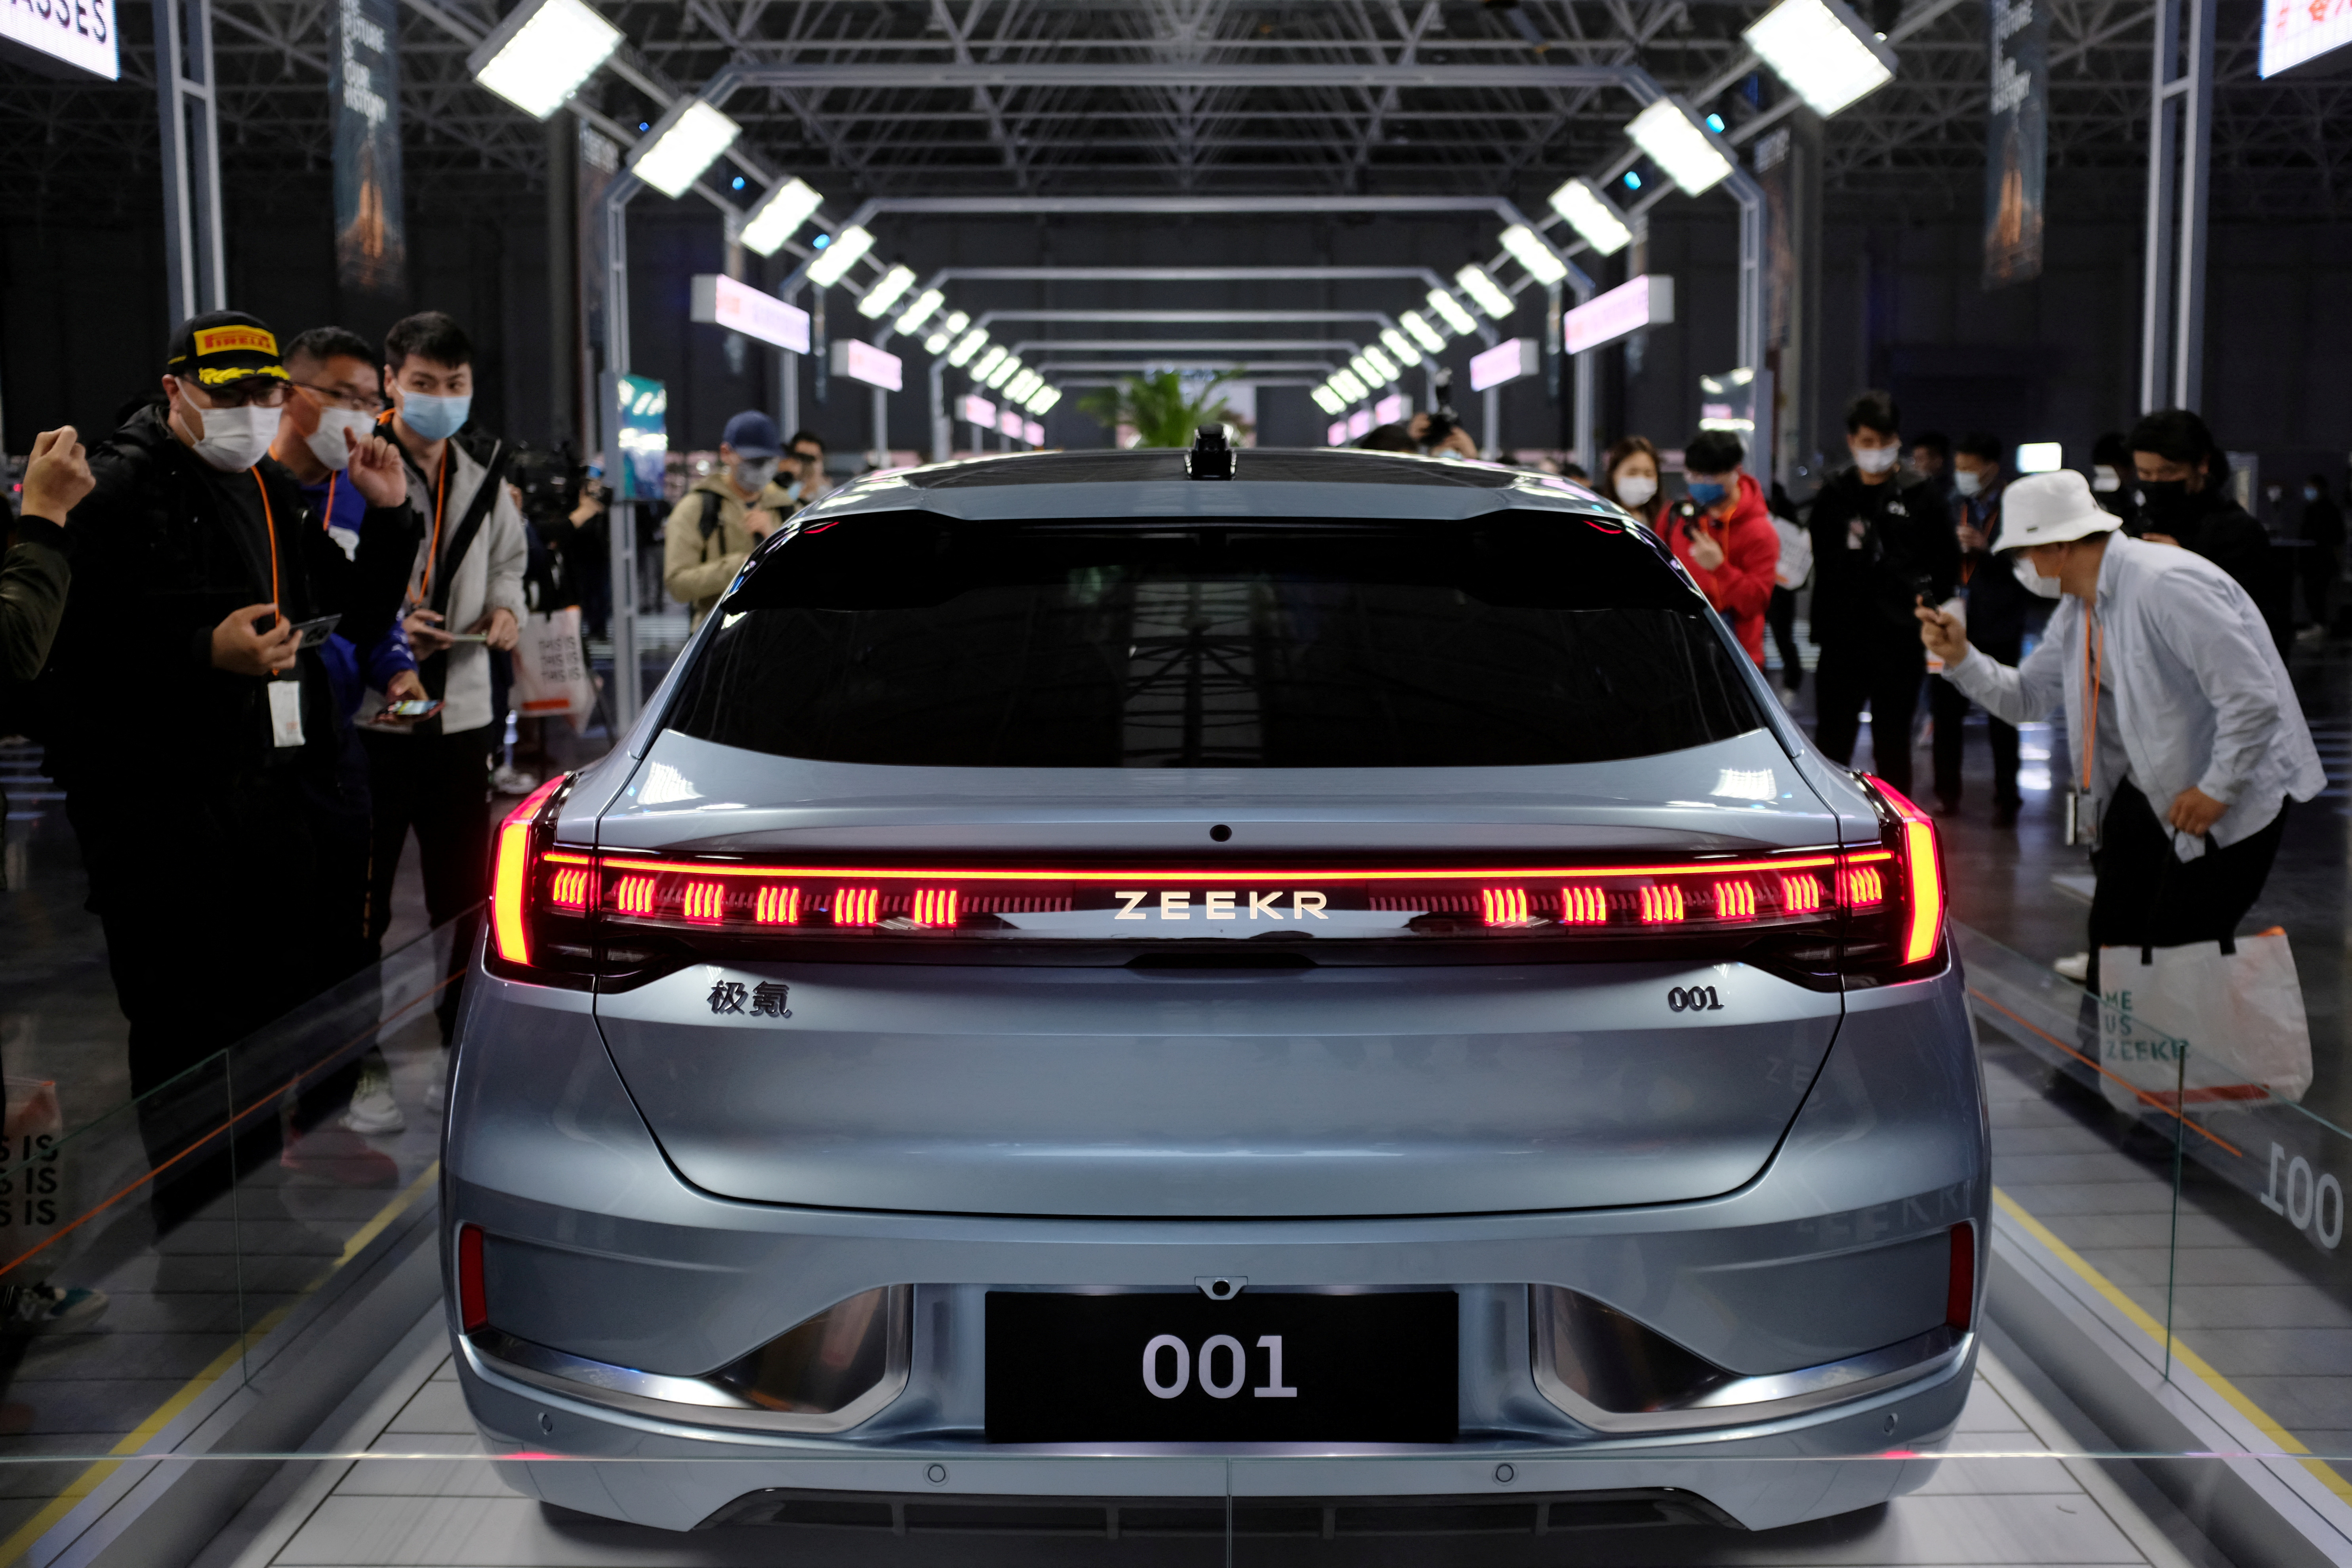 Visitors check a Zeekr 001, a model from Geely's Zeekr brand, at its factory in Ningbo